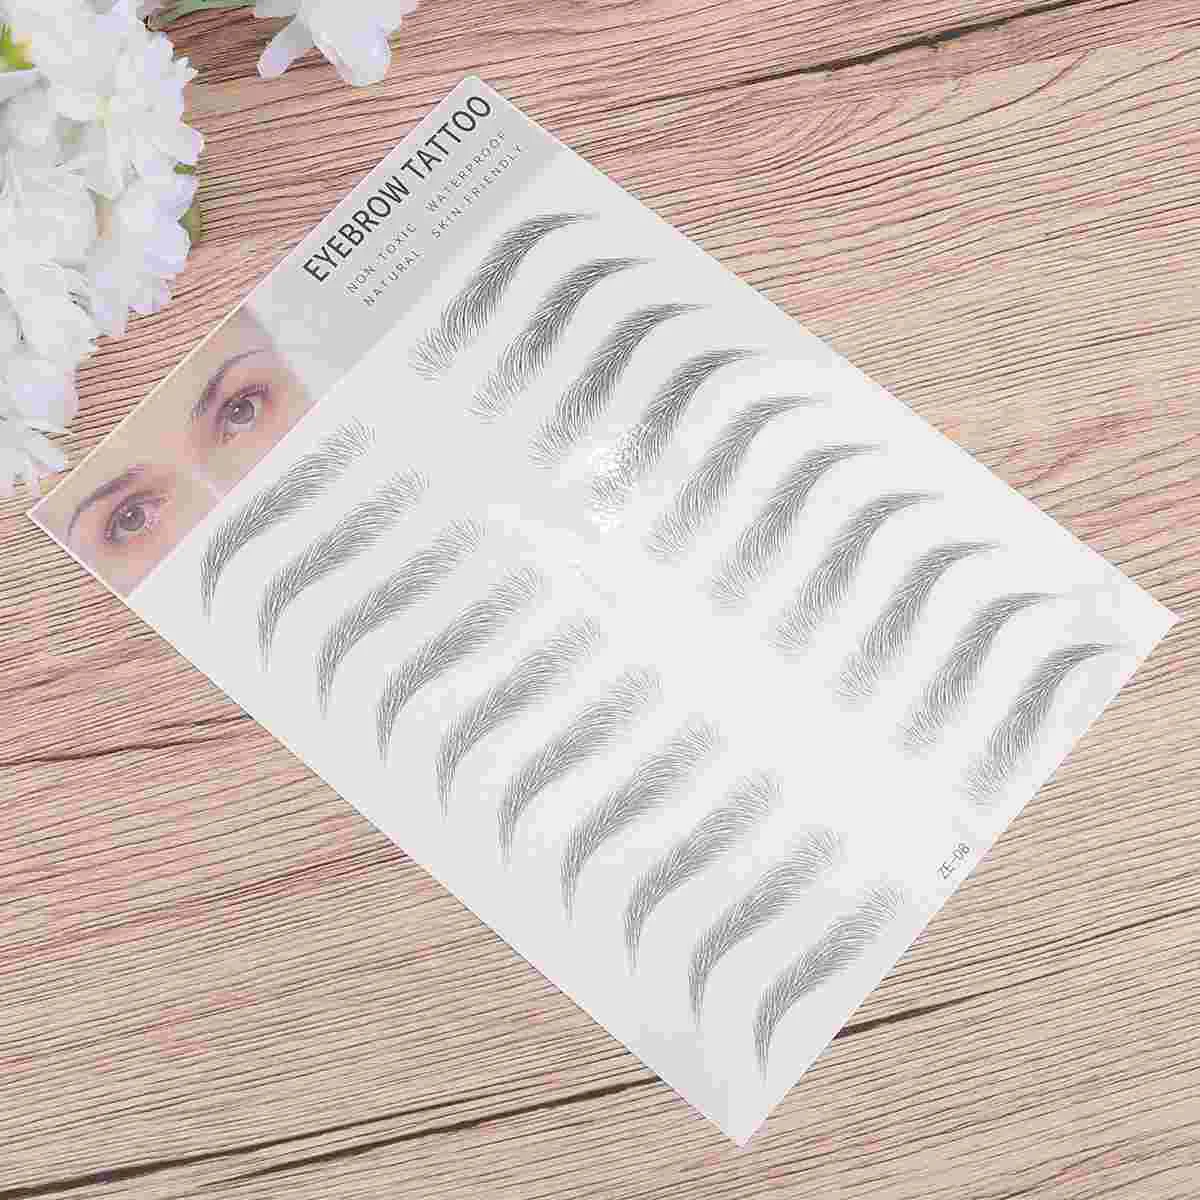 

Eyebrow Sticker Brow Stickers Transfer Imitation Artificial Makeup Tool Fake Off Peel Shaping Shaper Grooming Stencils Eyebrows